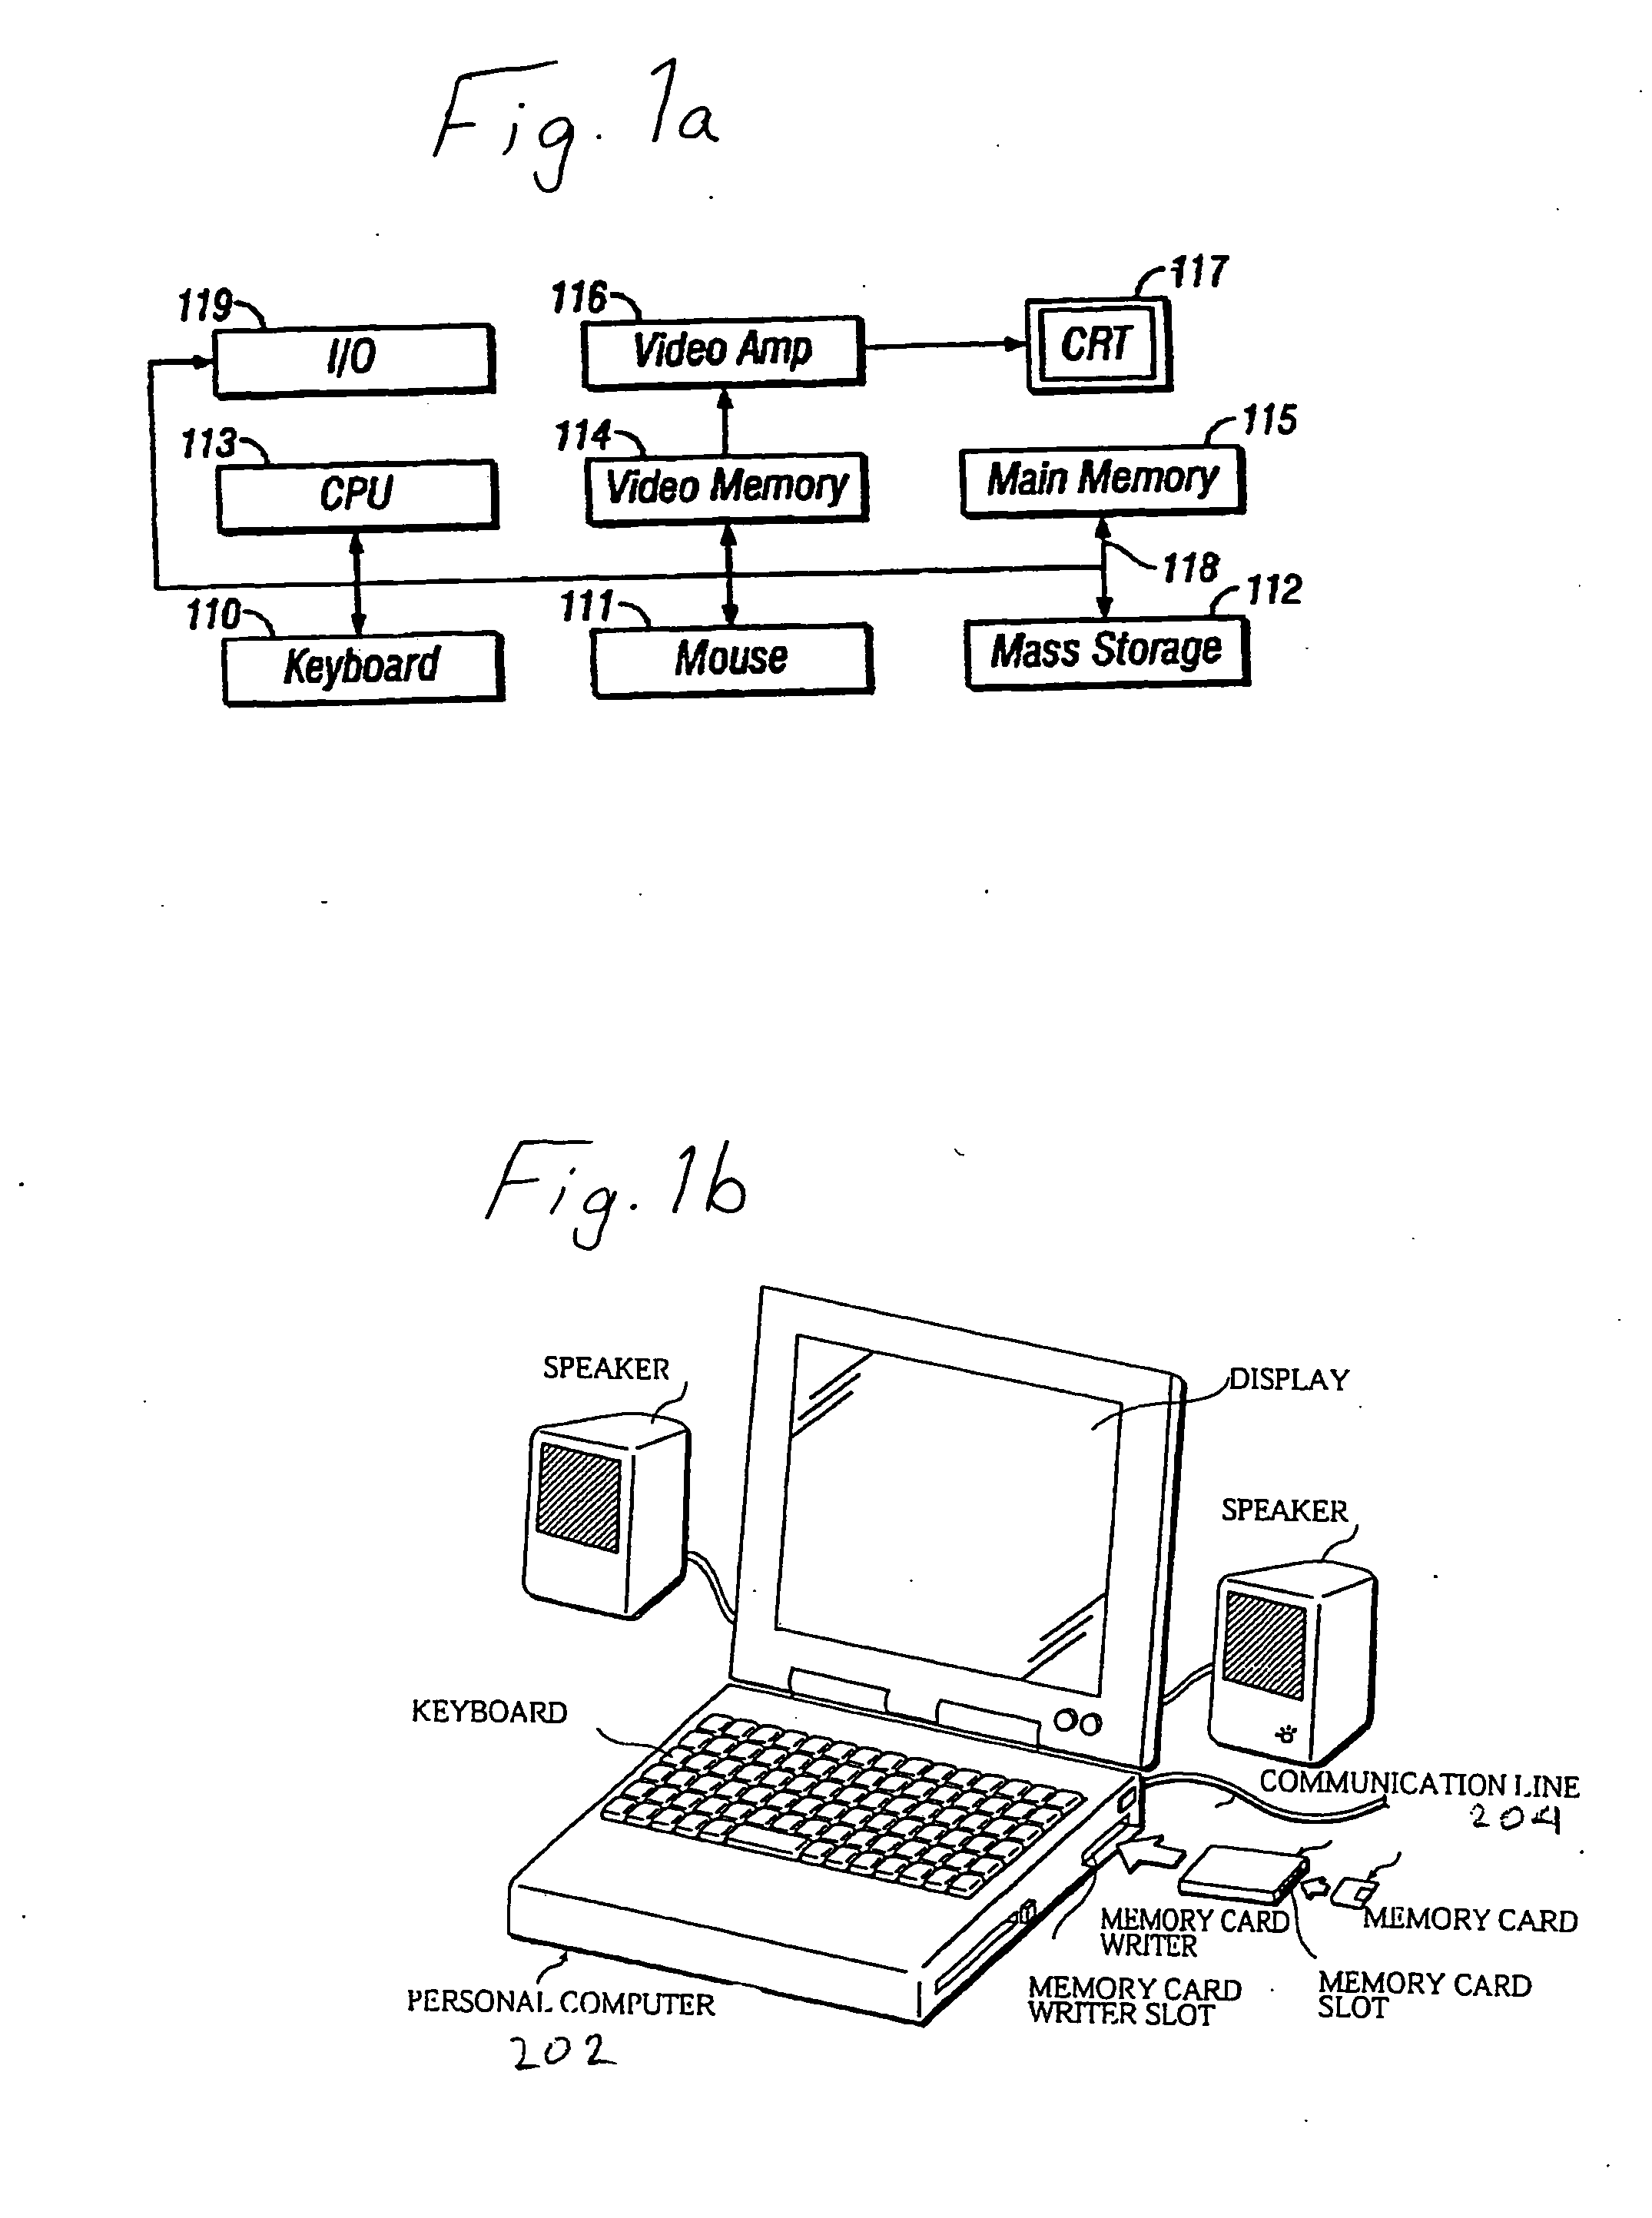 System, computer program and method for a cryptographic system using volatile allocation of a superkey